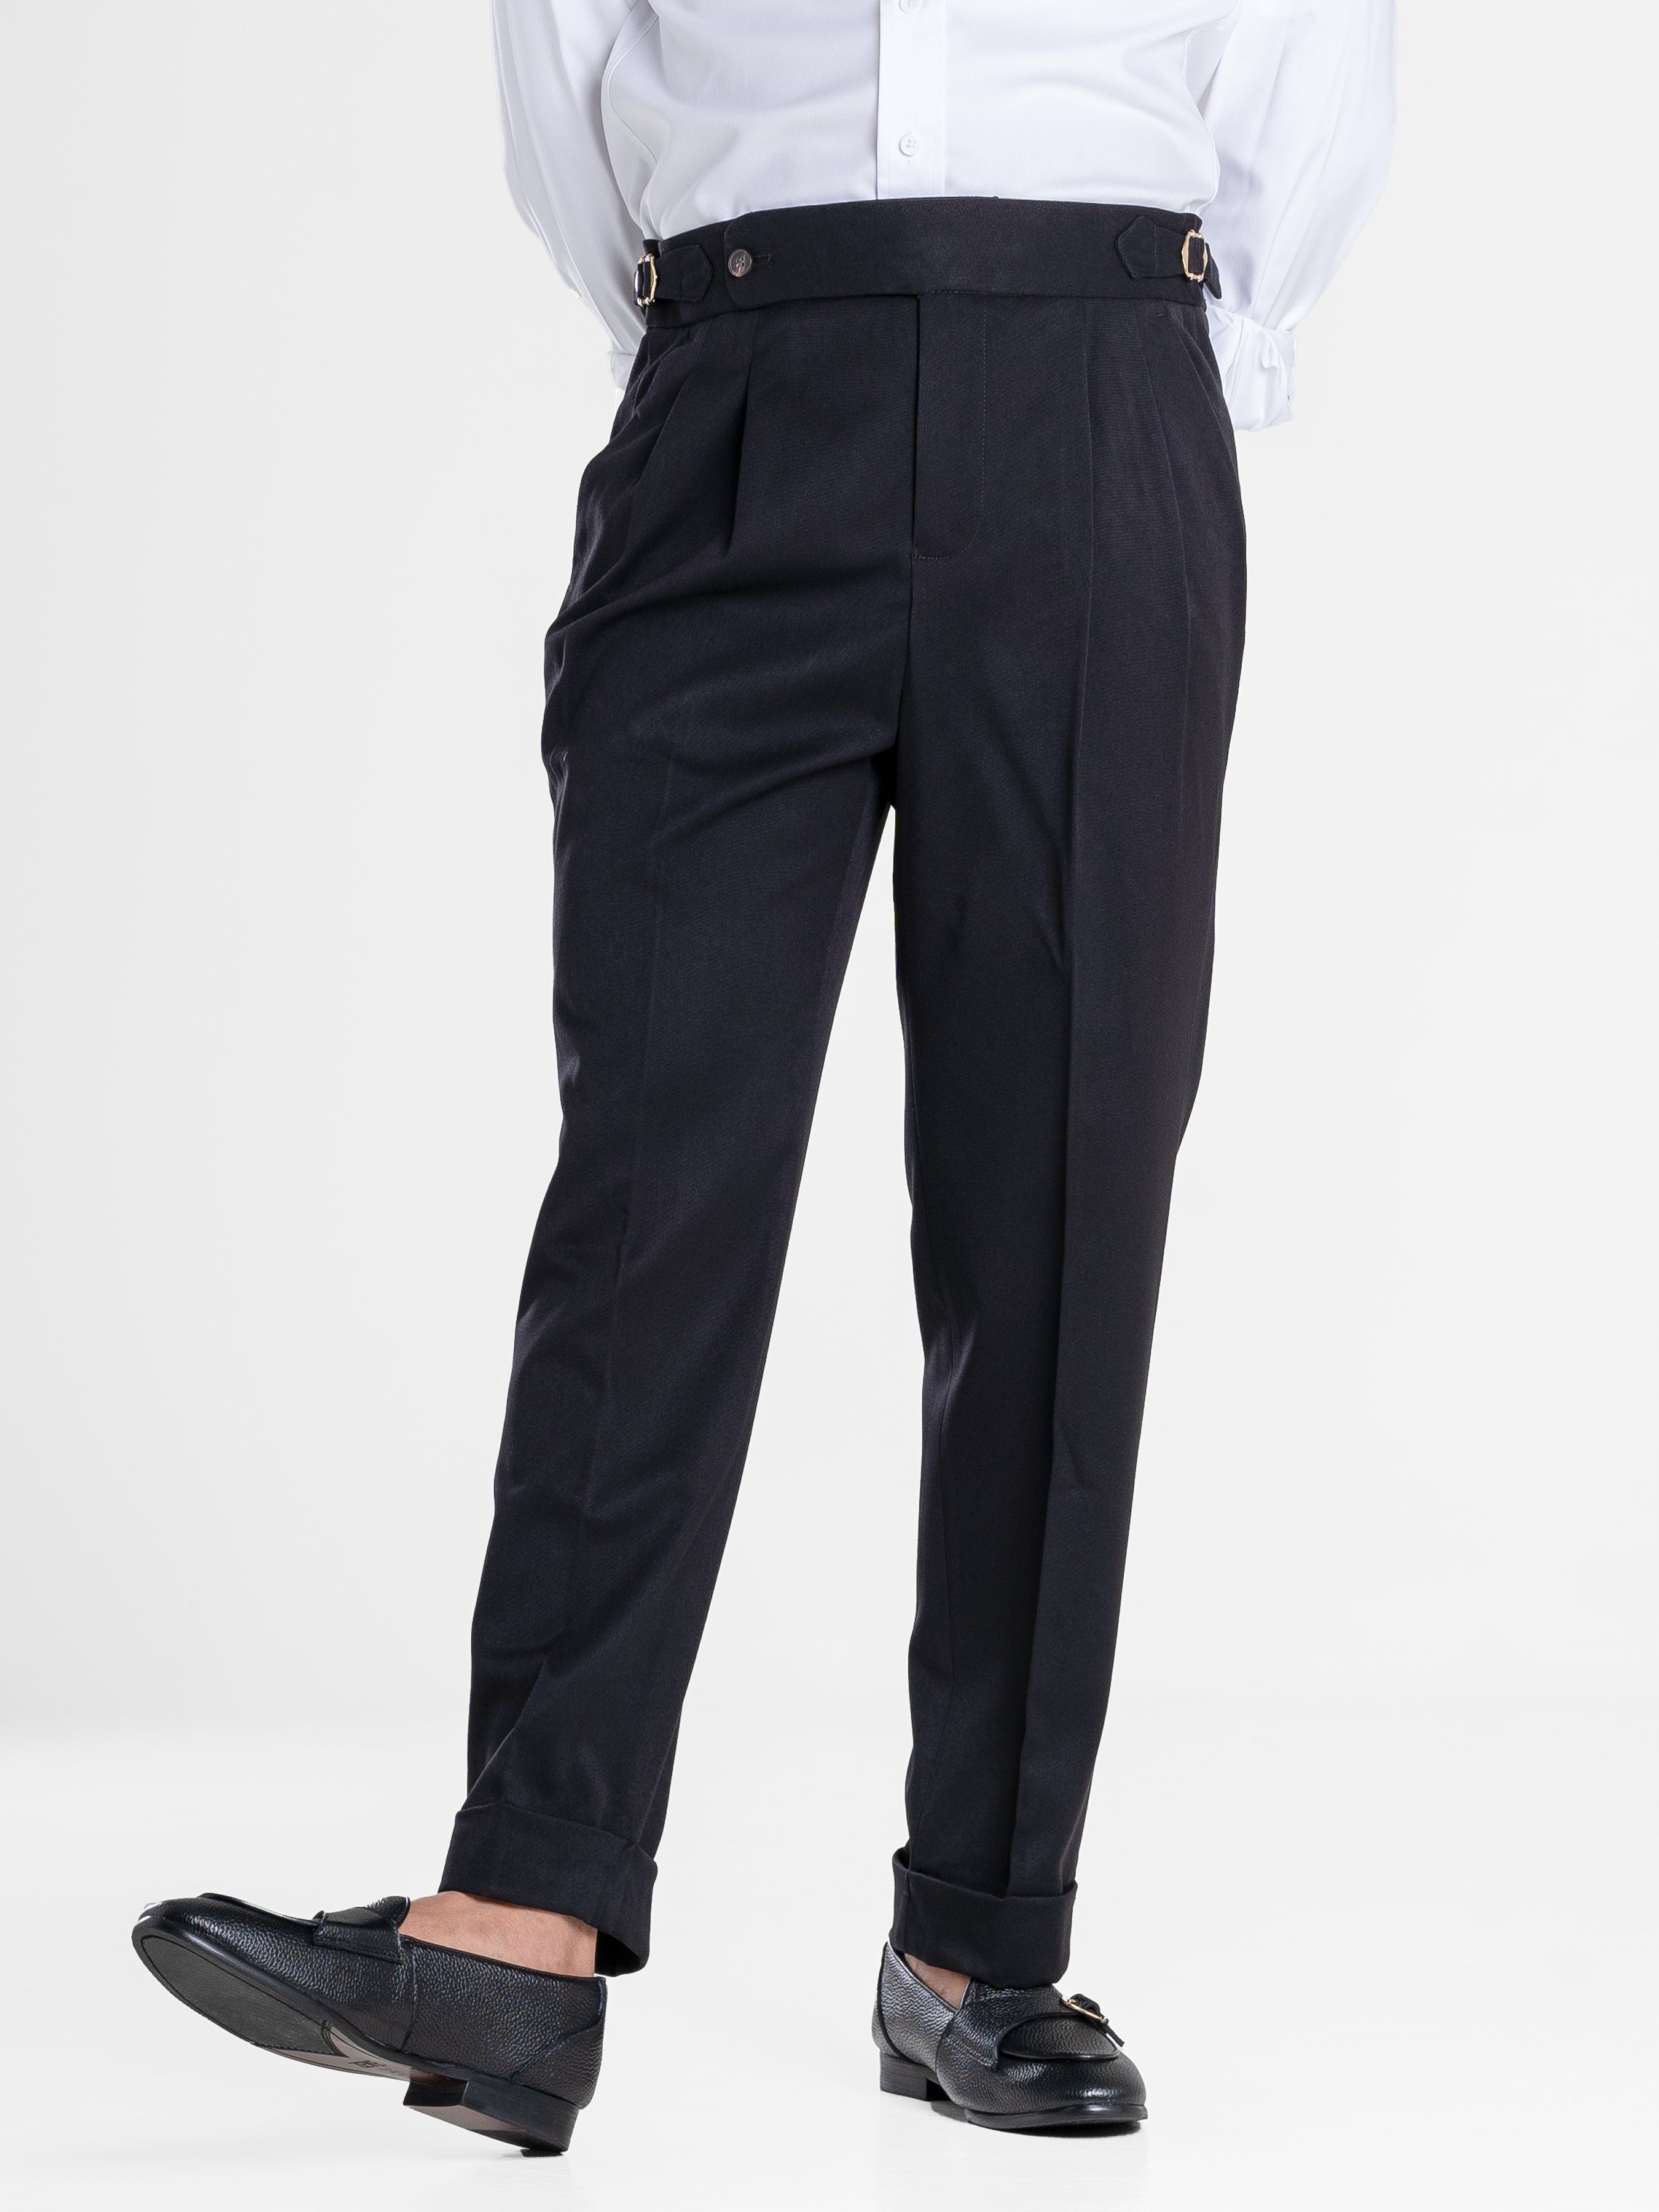 Trousers With Side Adjusters - Black Solid Cuffed (Stretchable)